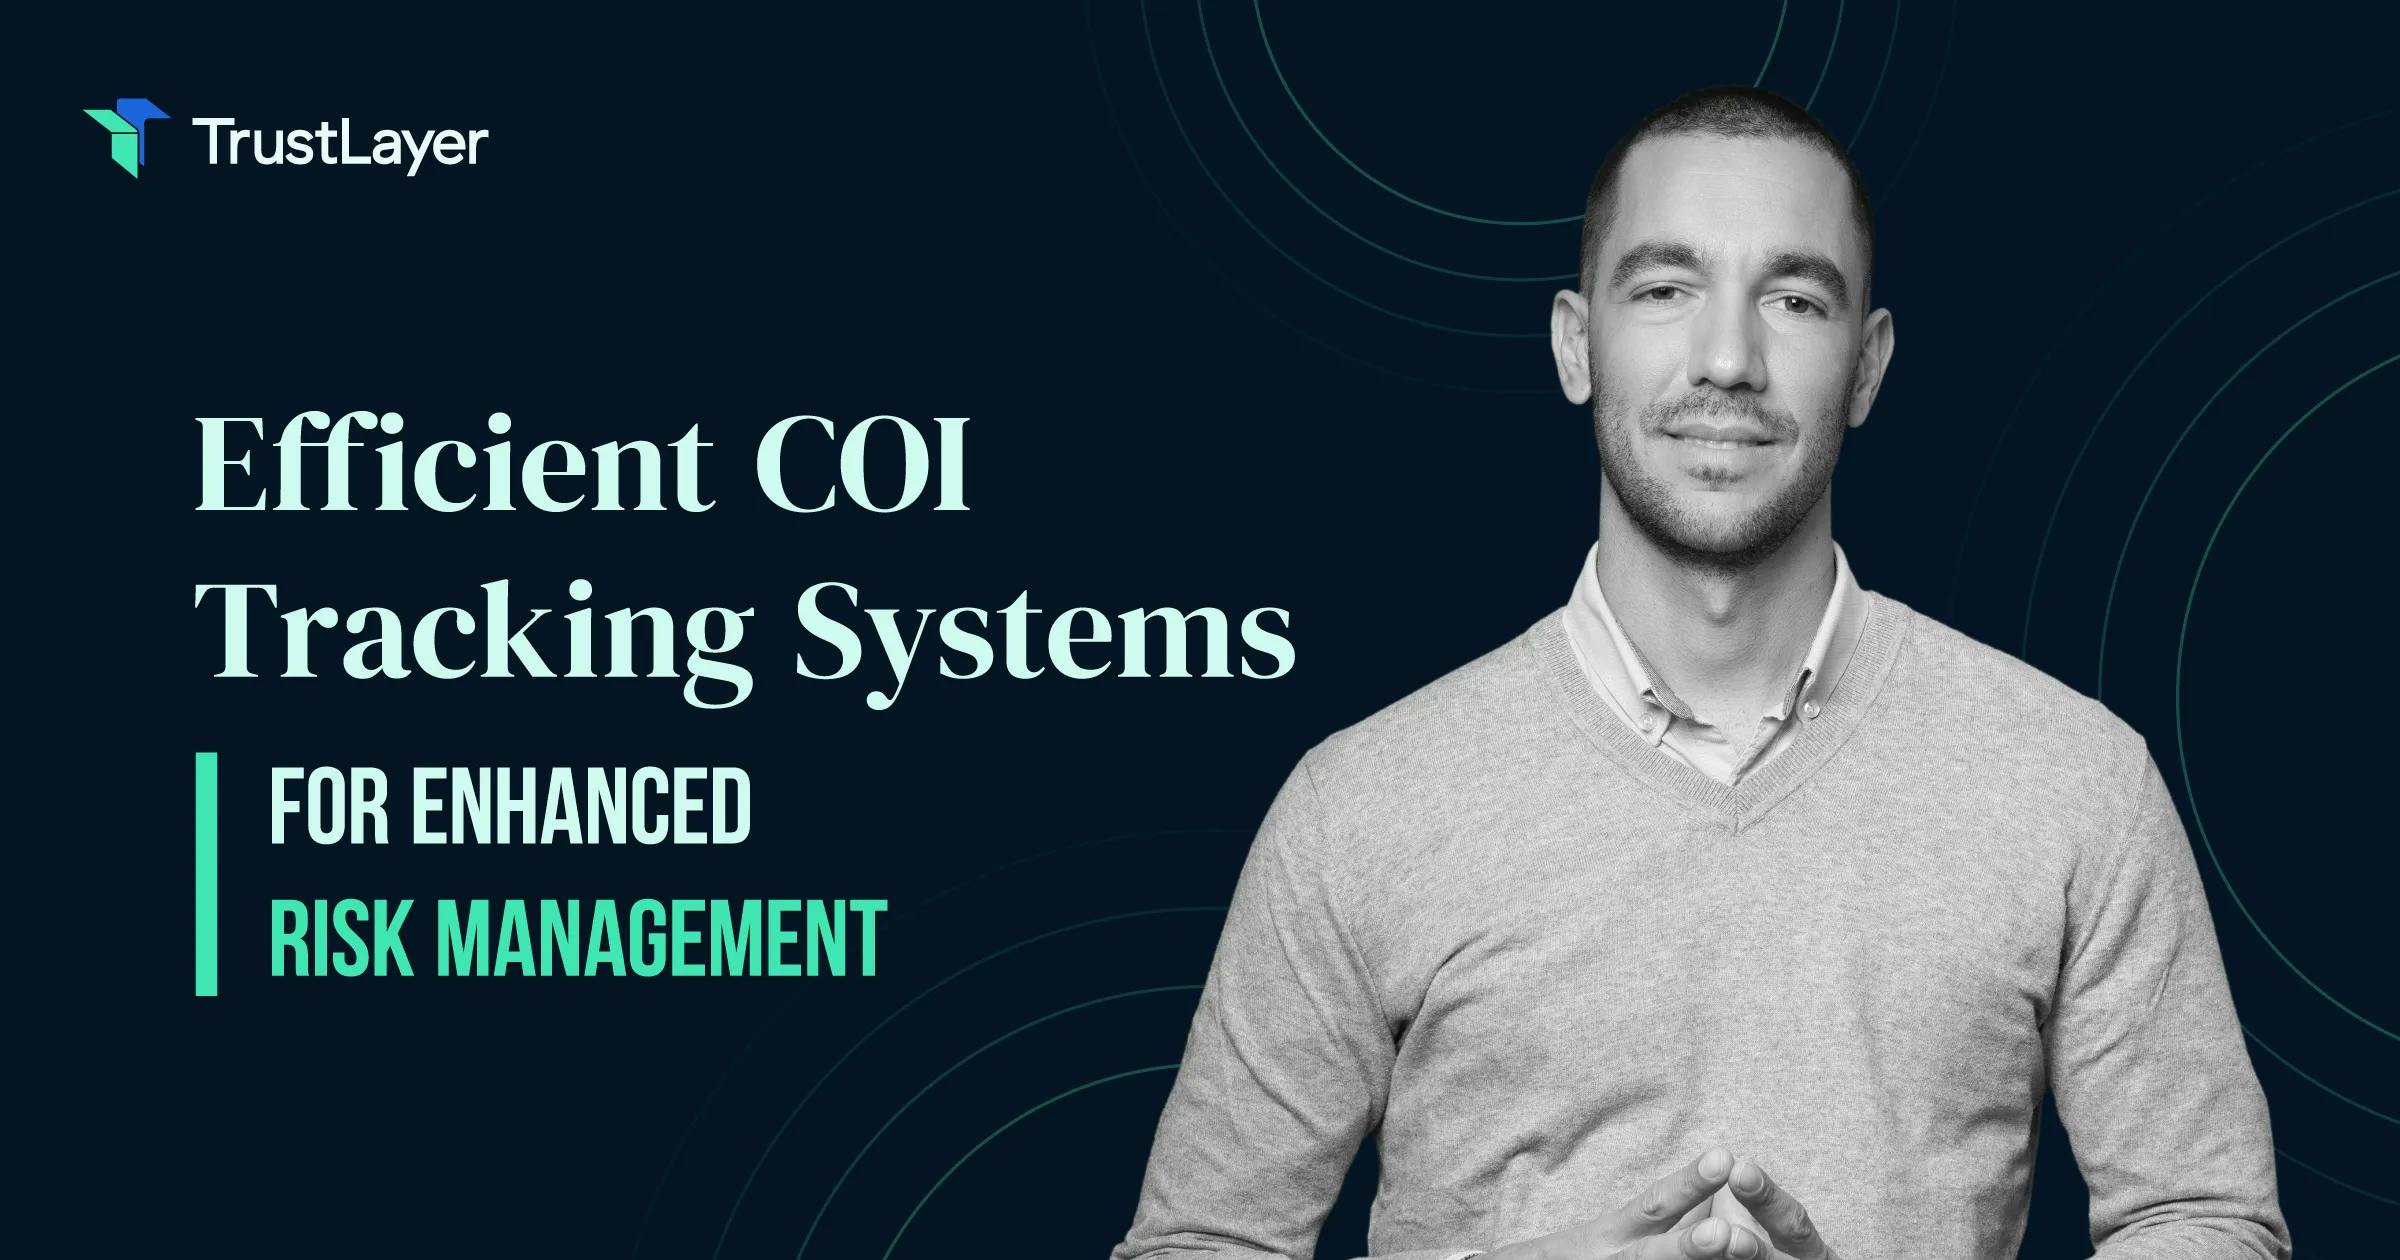 Efficient COI Tracking Systems for Enhanced Risk Management